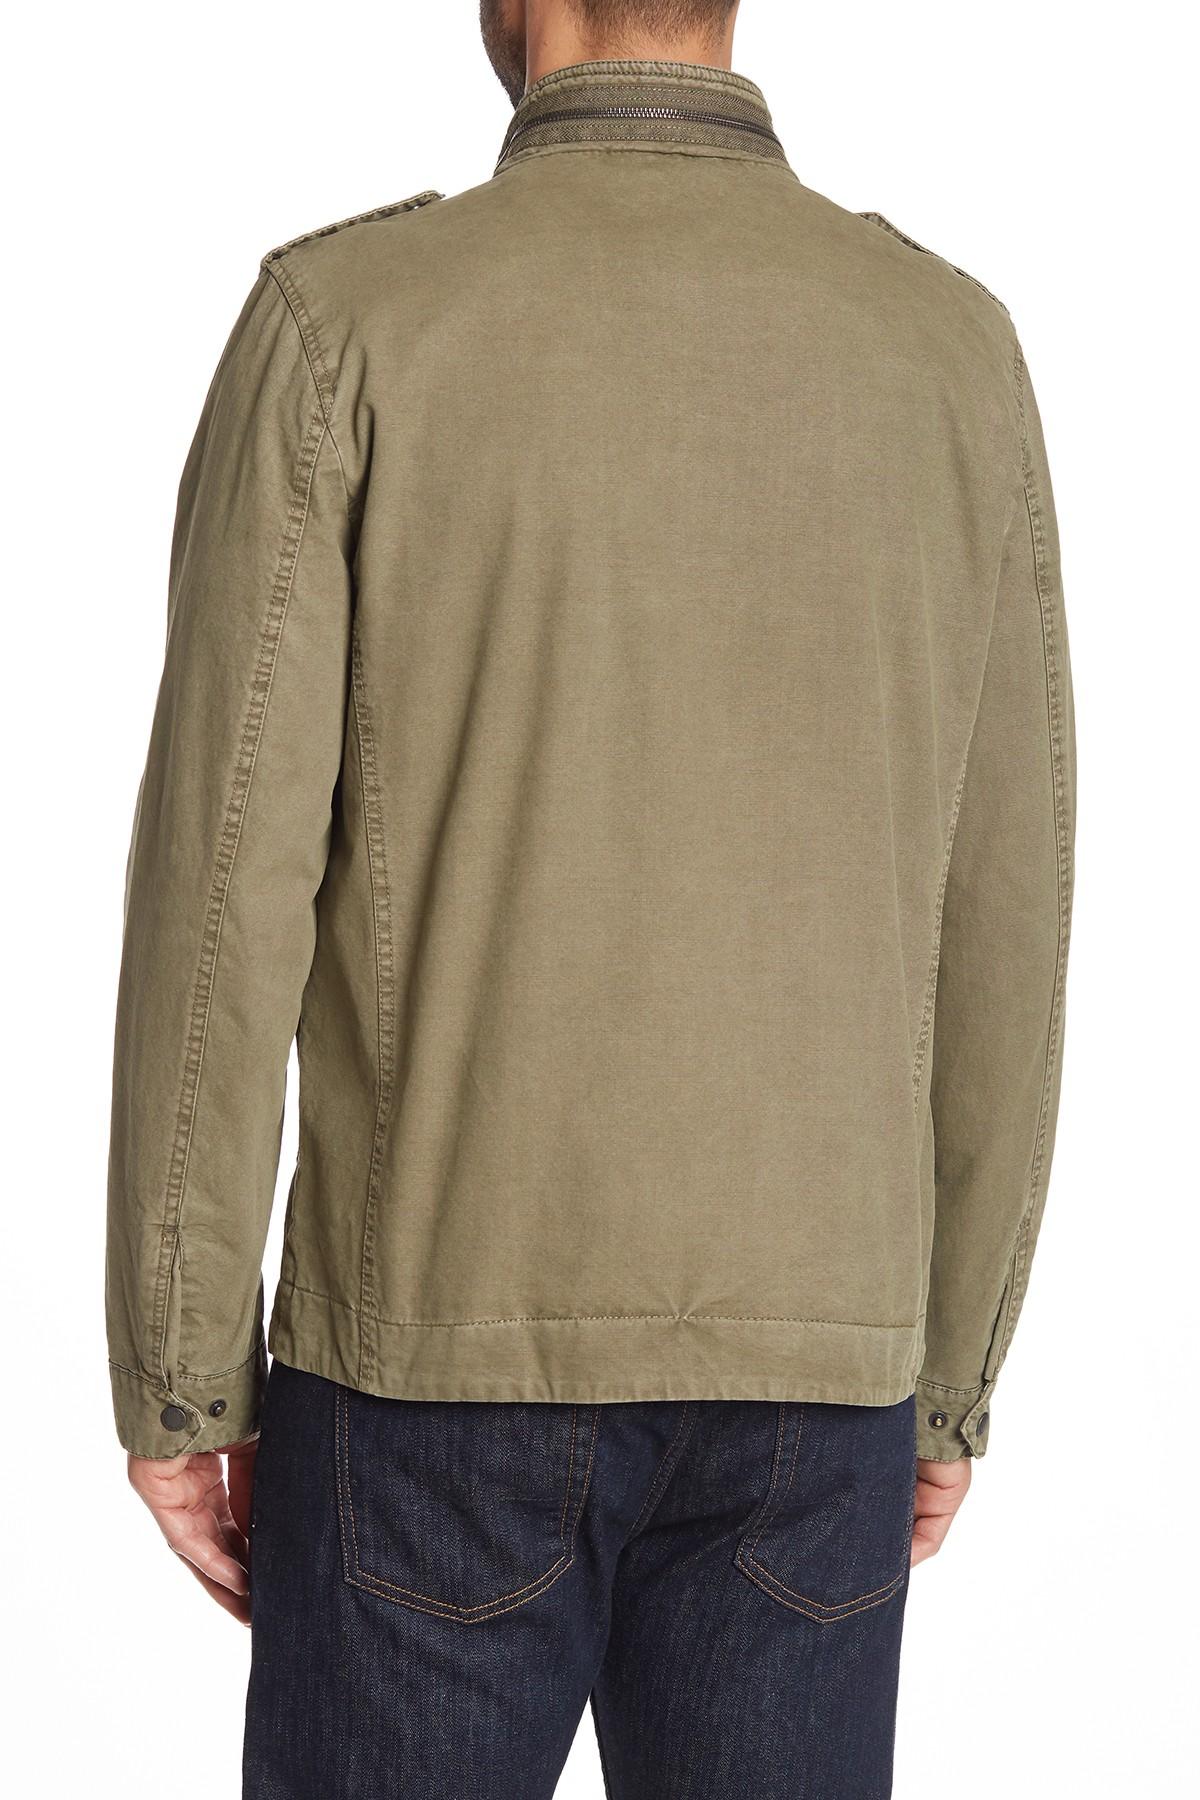 Levi's Reverse Twill Military Jacket in Green for Men - Lyst